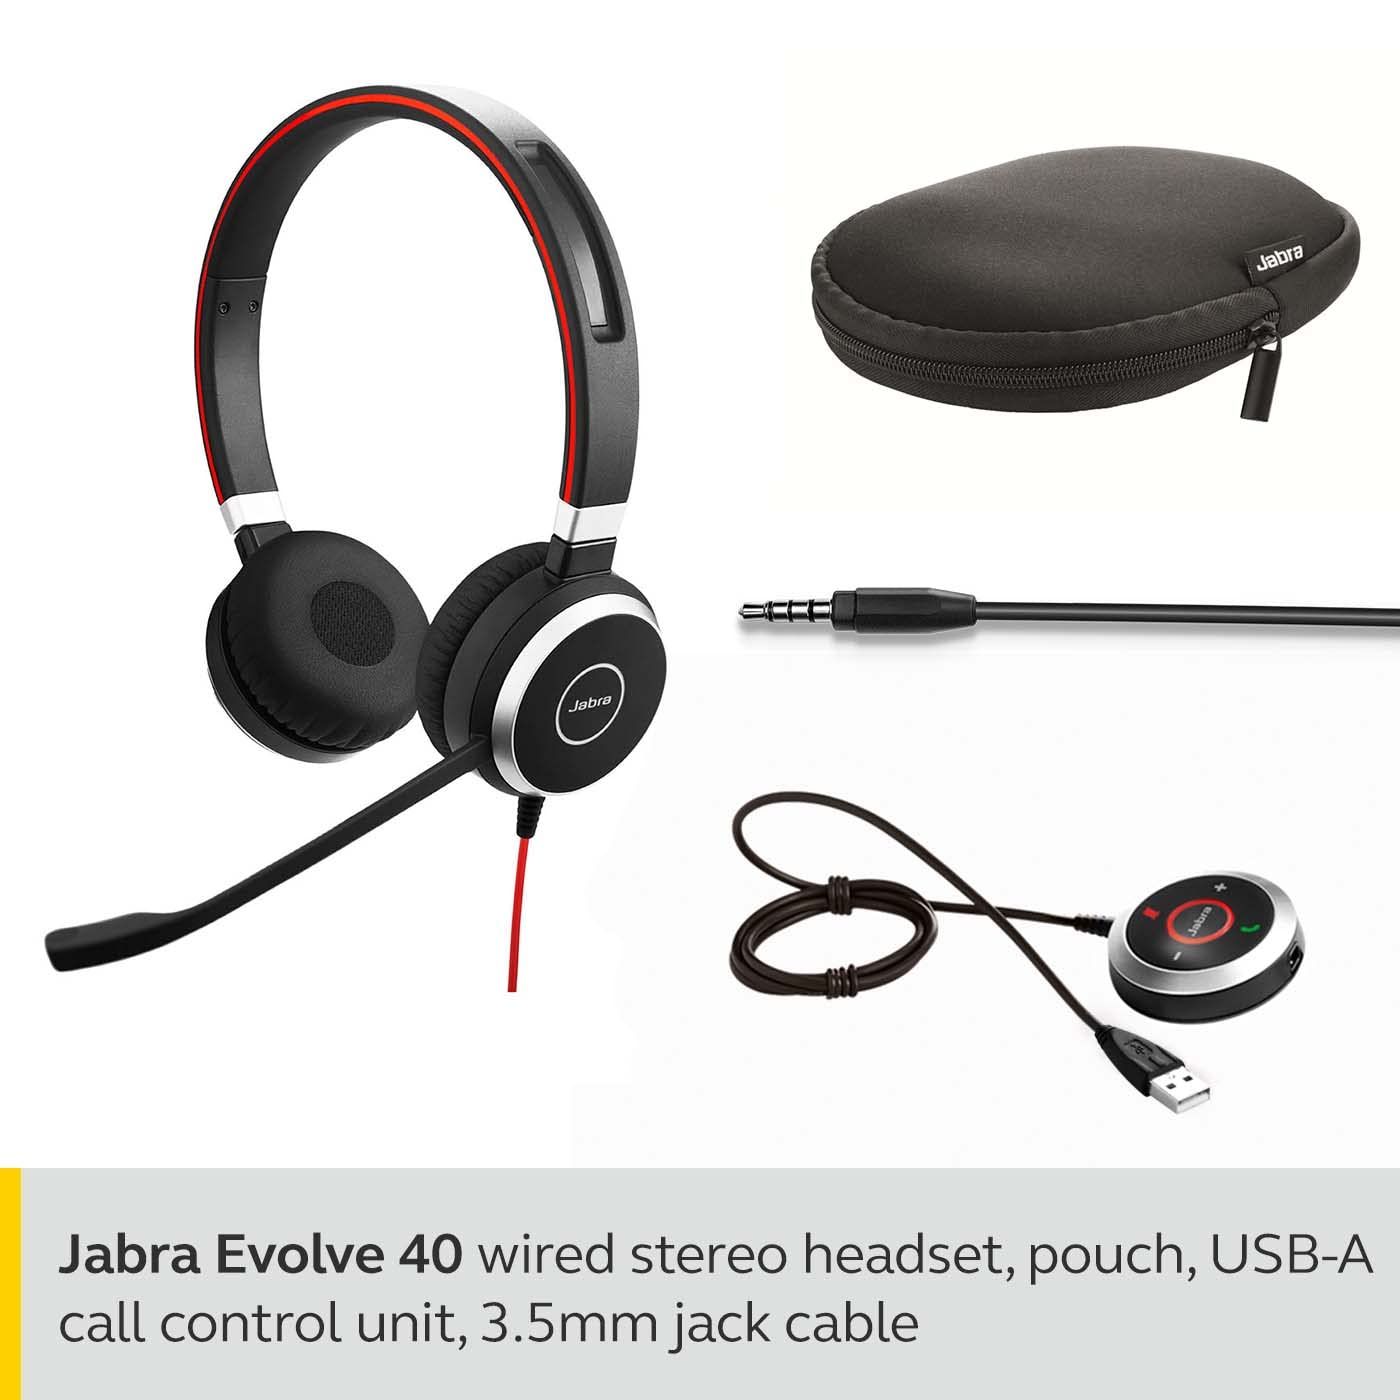 Jabra Evolve 40 Professional Wired Headset, Stereo, UC-Optimized – Telephone Headset for Greater Productivity, Superior Sound for Calls and Music, 3.5mm Jack/USB Connection, All-Day Comfort Design